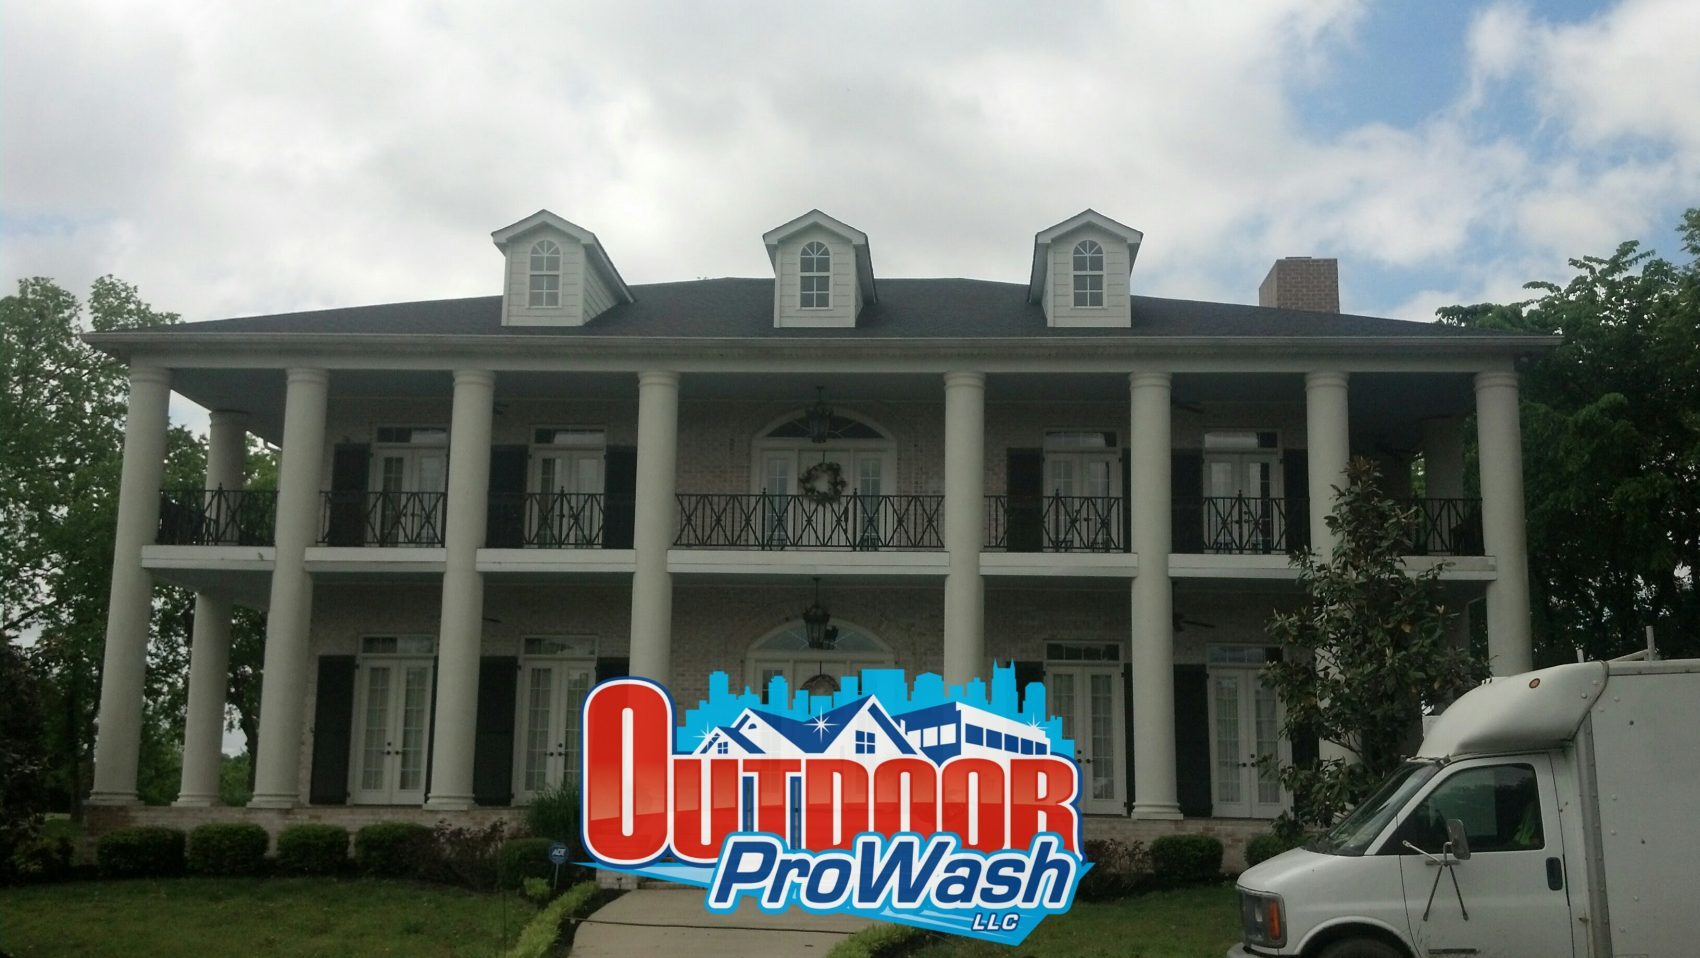 Ultimate House Wash